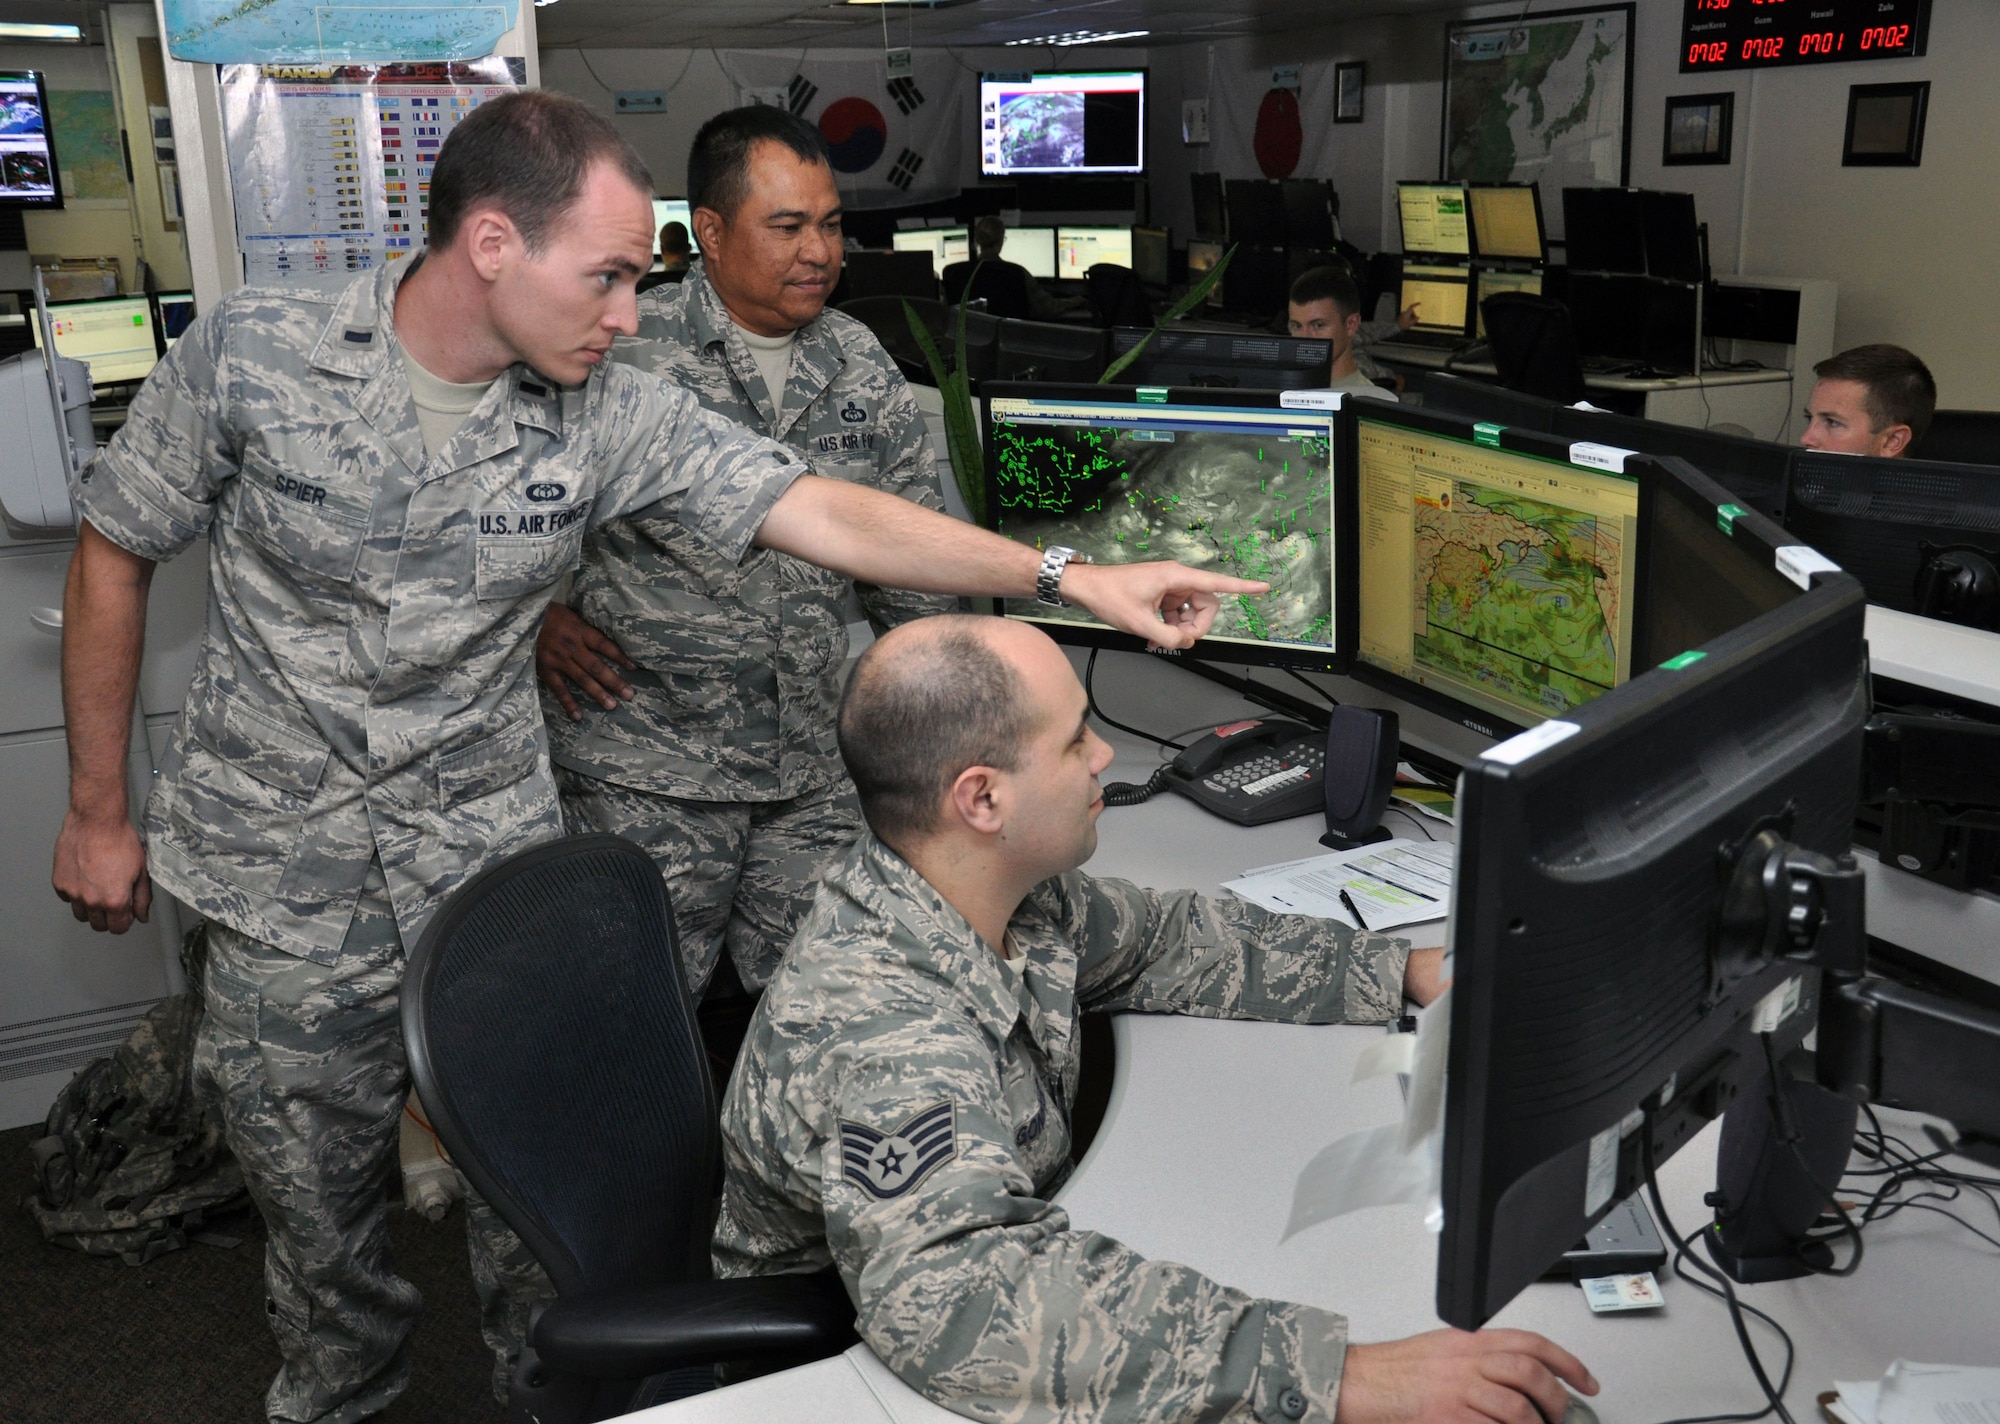 1st Lt. Andrew Spier, 17th Operational Weather Squadron Officer in Charge,
Senior Master Sgt. Greg Espinosa, Flight Chief of Contingency Operations,
and Staff Sgt. Arthur Gonzalez, West Zone Forecast Supervisor, monitor
weather forecasting equipment to provide constant updates on incoming
weather patterns to service members throughout the Pacific theater. The 17th
OWS provided detailed weather forecasts of Mount Everest to the Airmen from
the USAF 7 Summits team enabling mountaineers to become the first U.S.
military team to summit the peak.